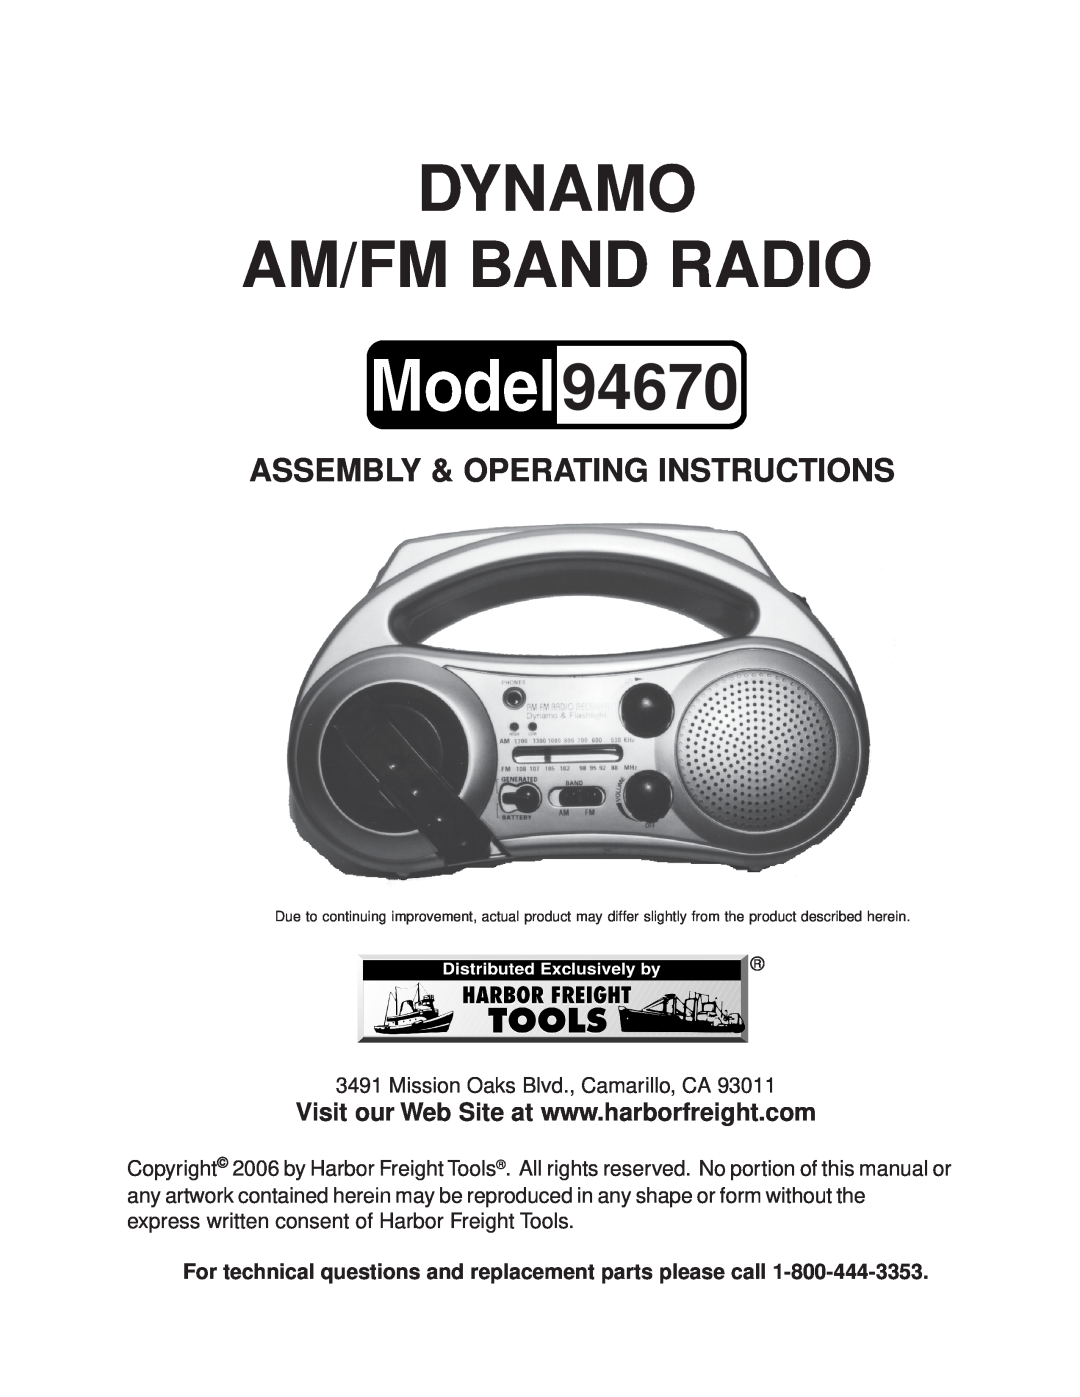 Harbor Freight Tools 94670 manual Dynamo Am/Fm Band Radio, Assembly & Operating Instructions 